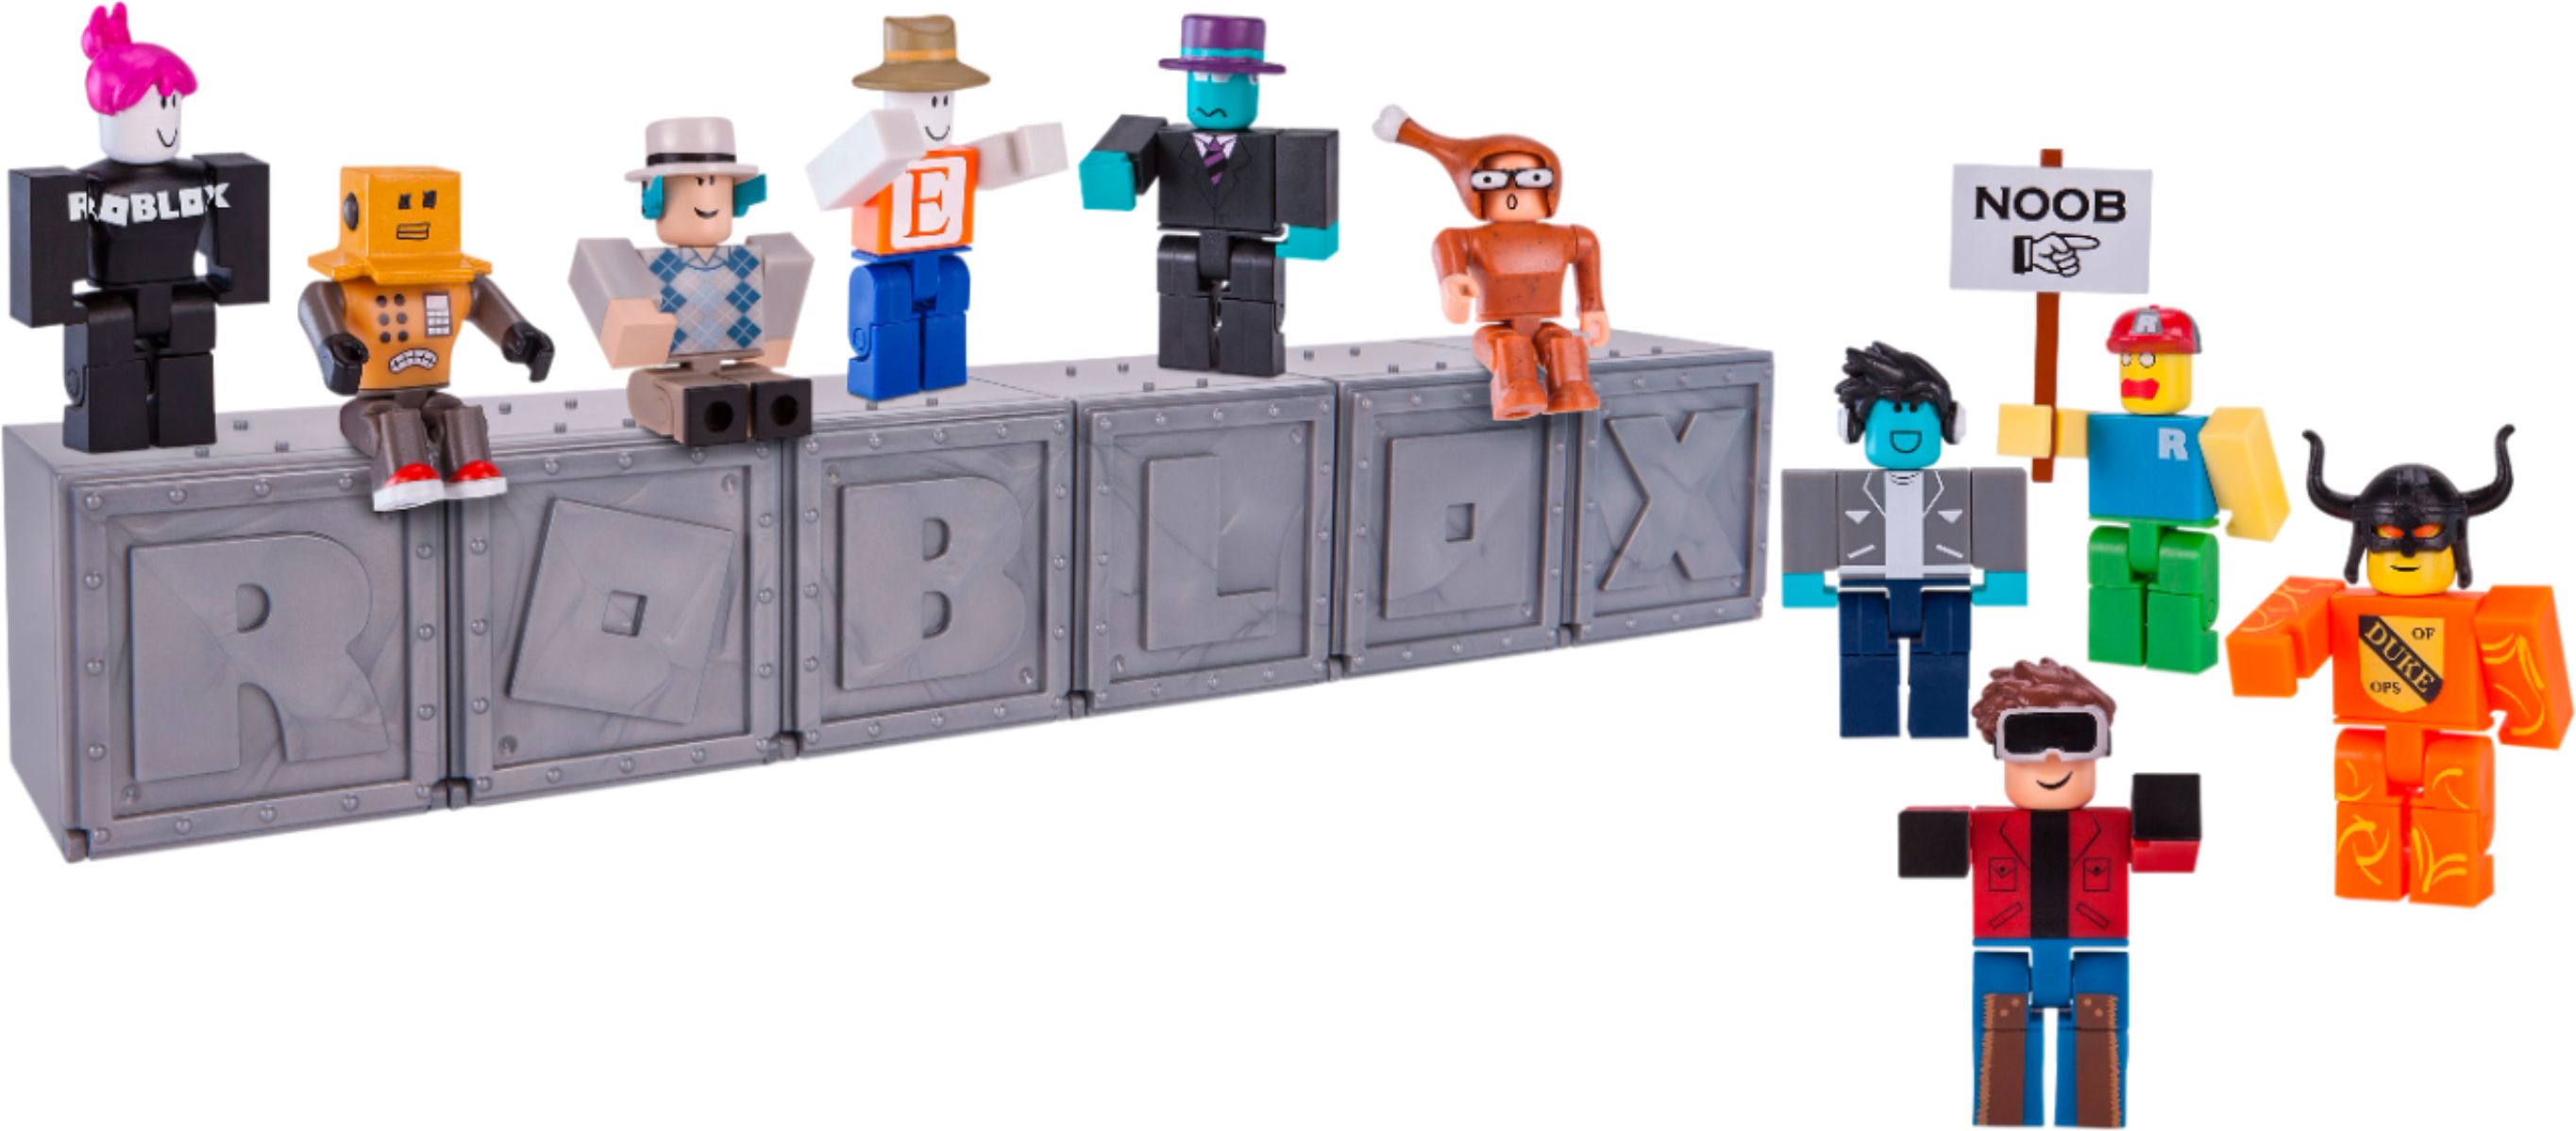 Best Buy Roblox Series 1 Mystery Figure Styles May Vary 10700